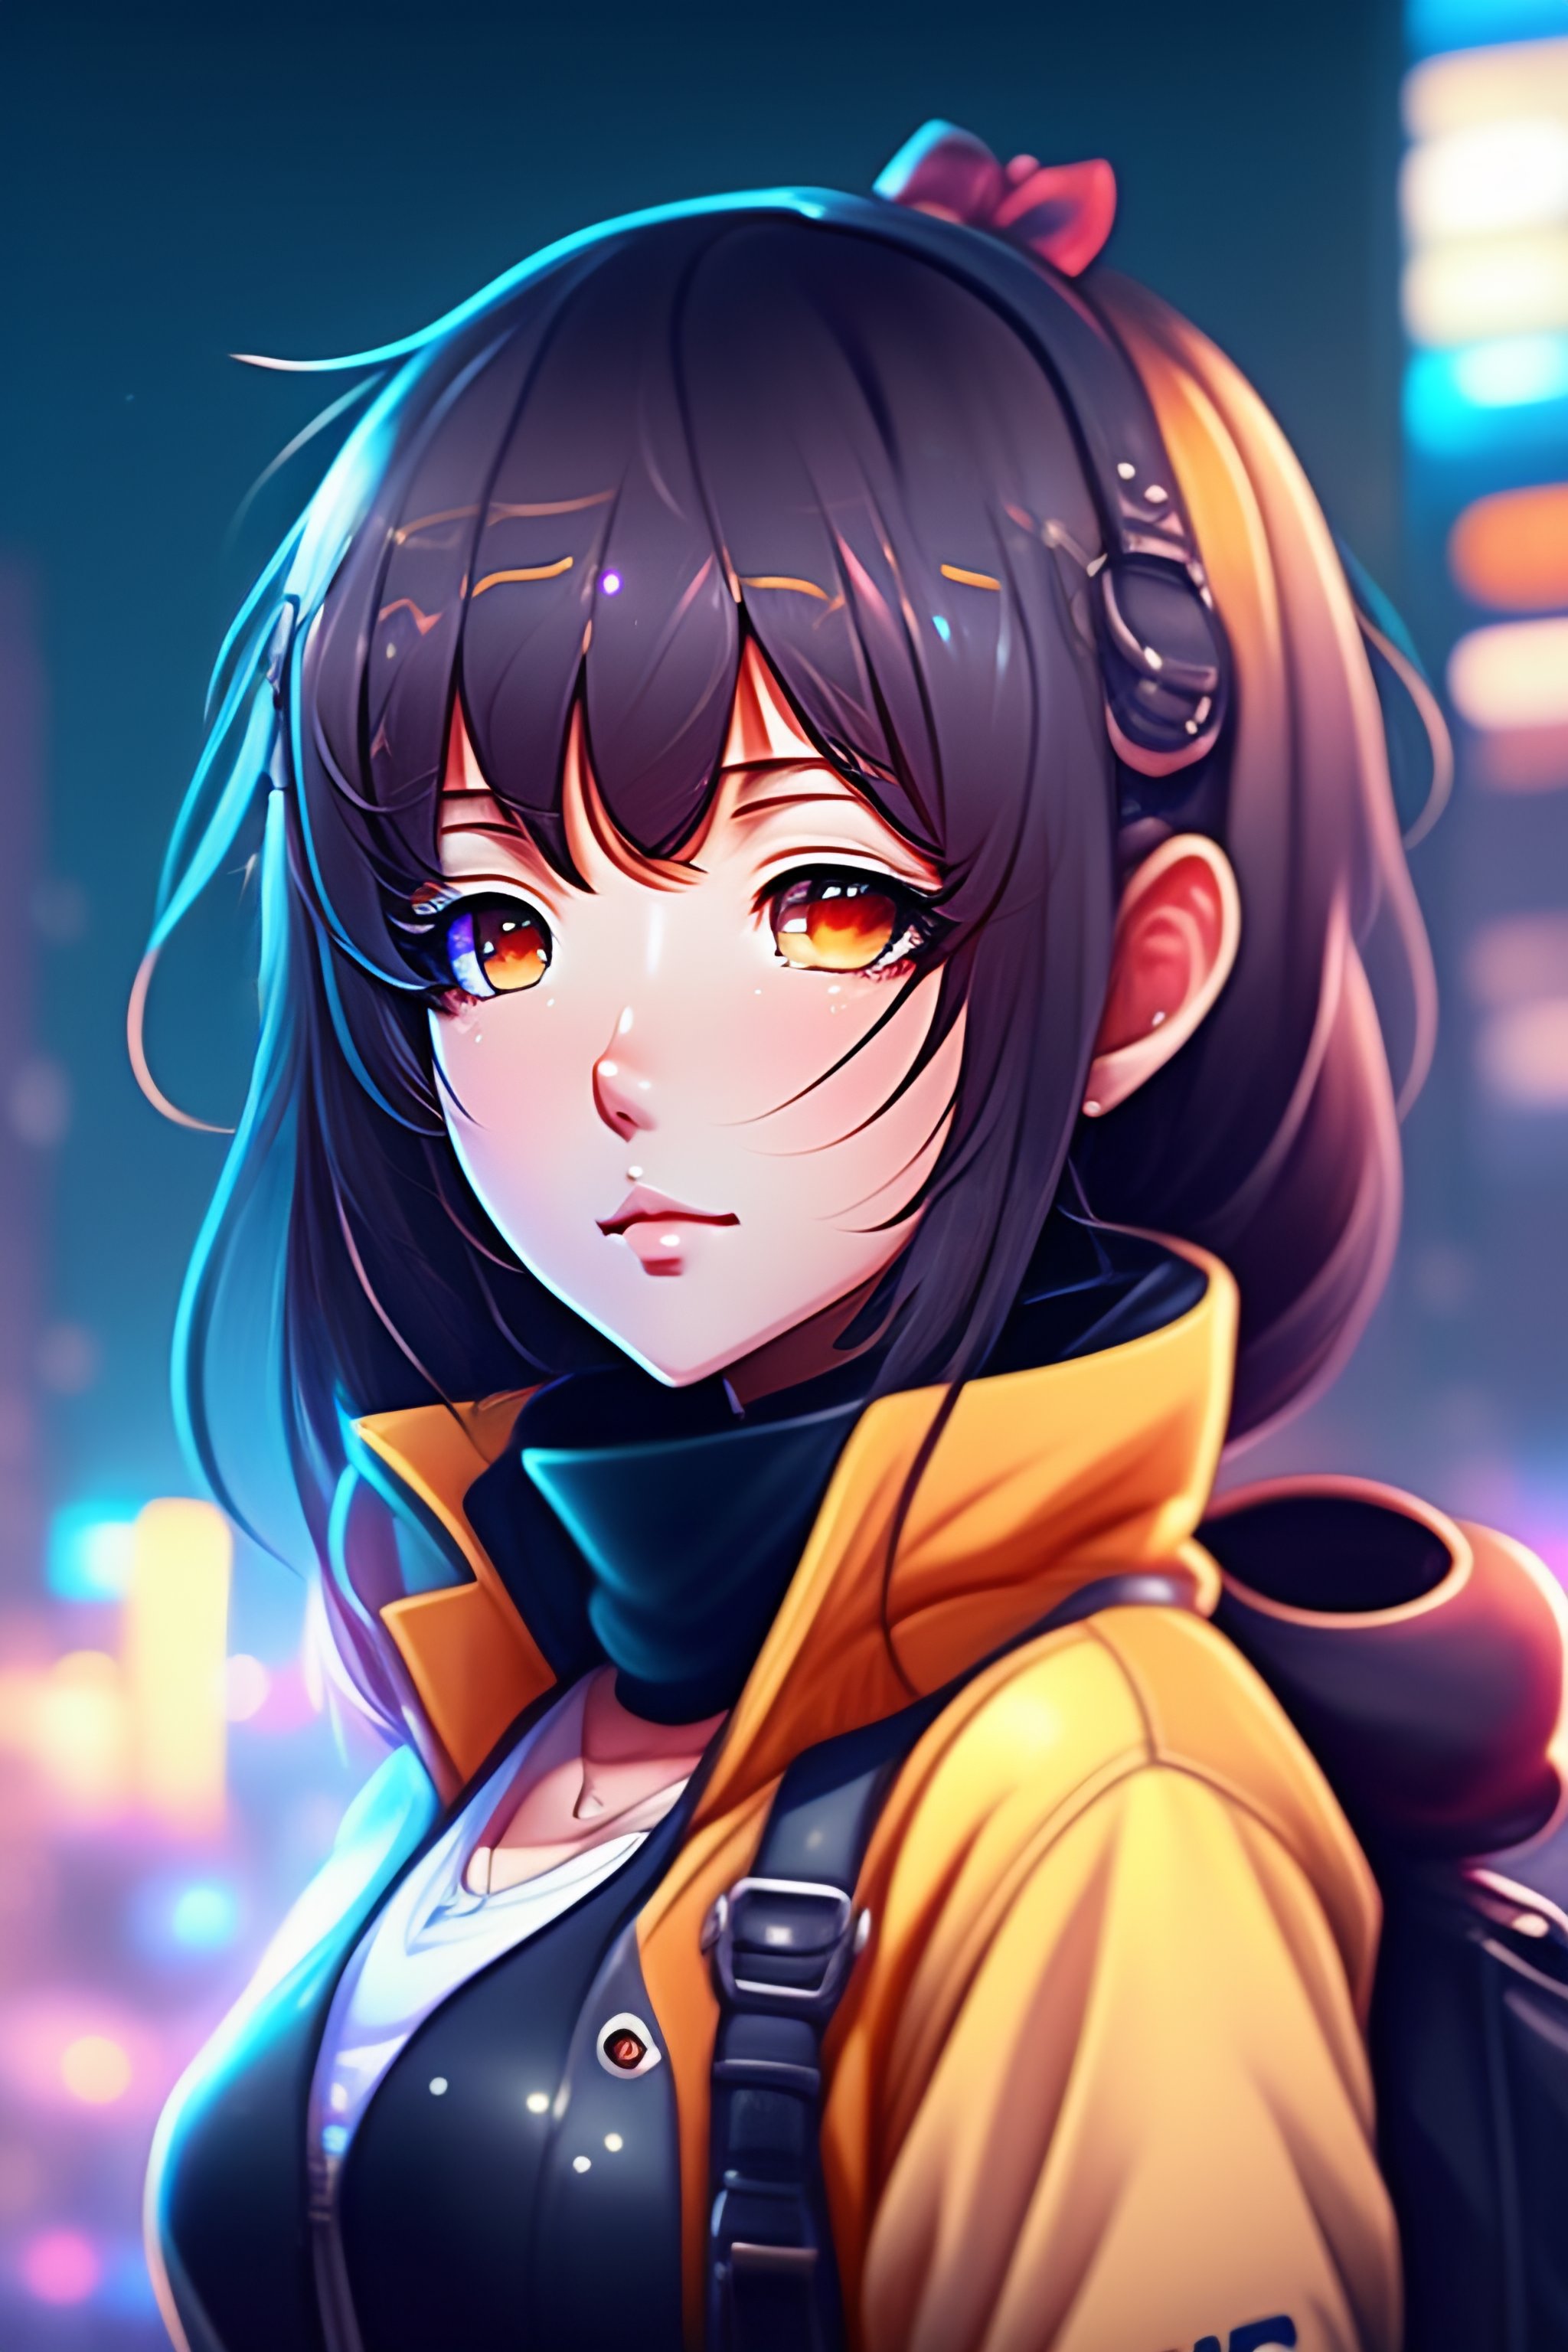 Lexica - Portrait of cute anime girl, night city background ...